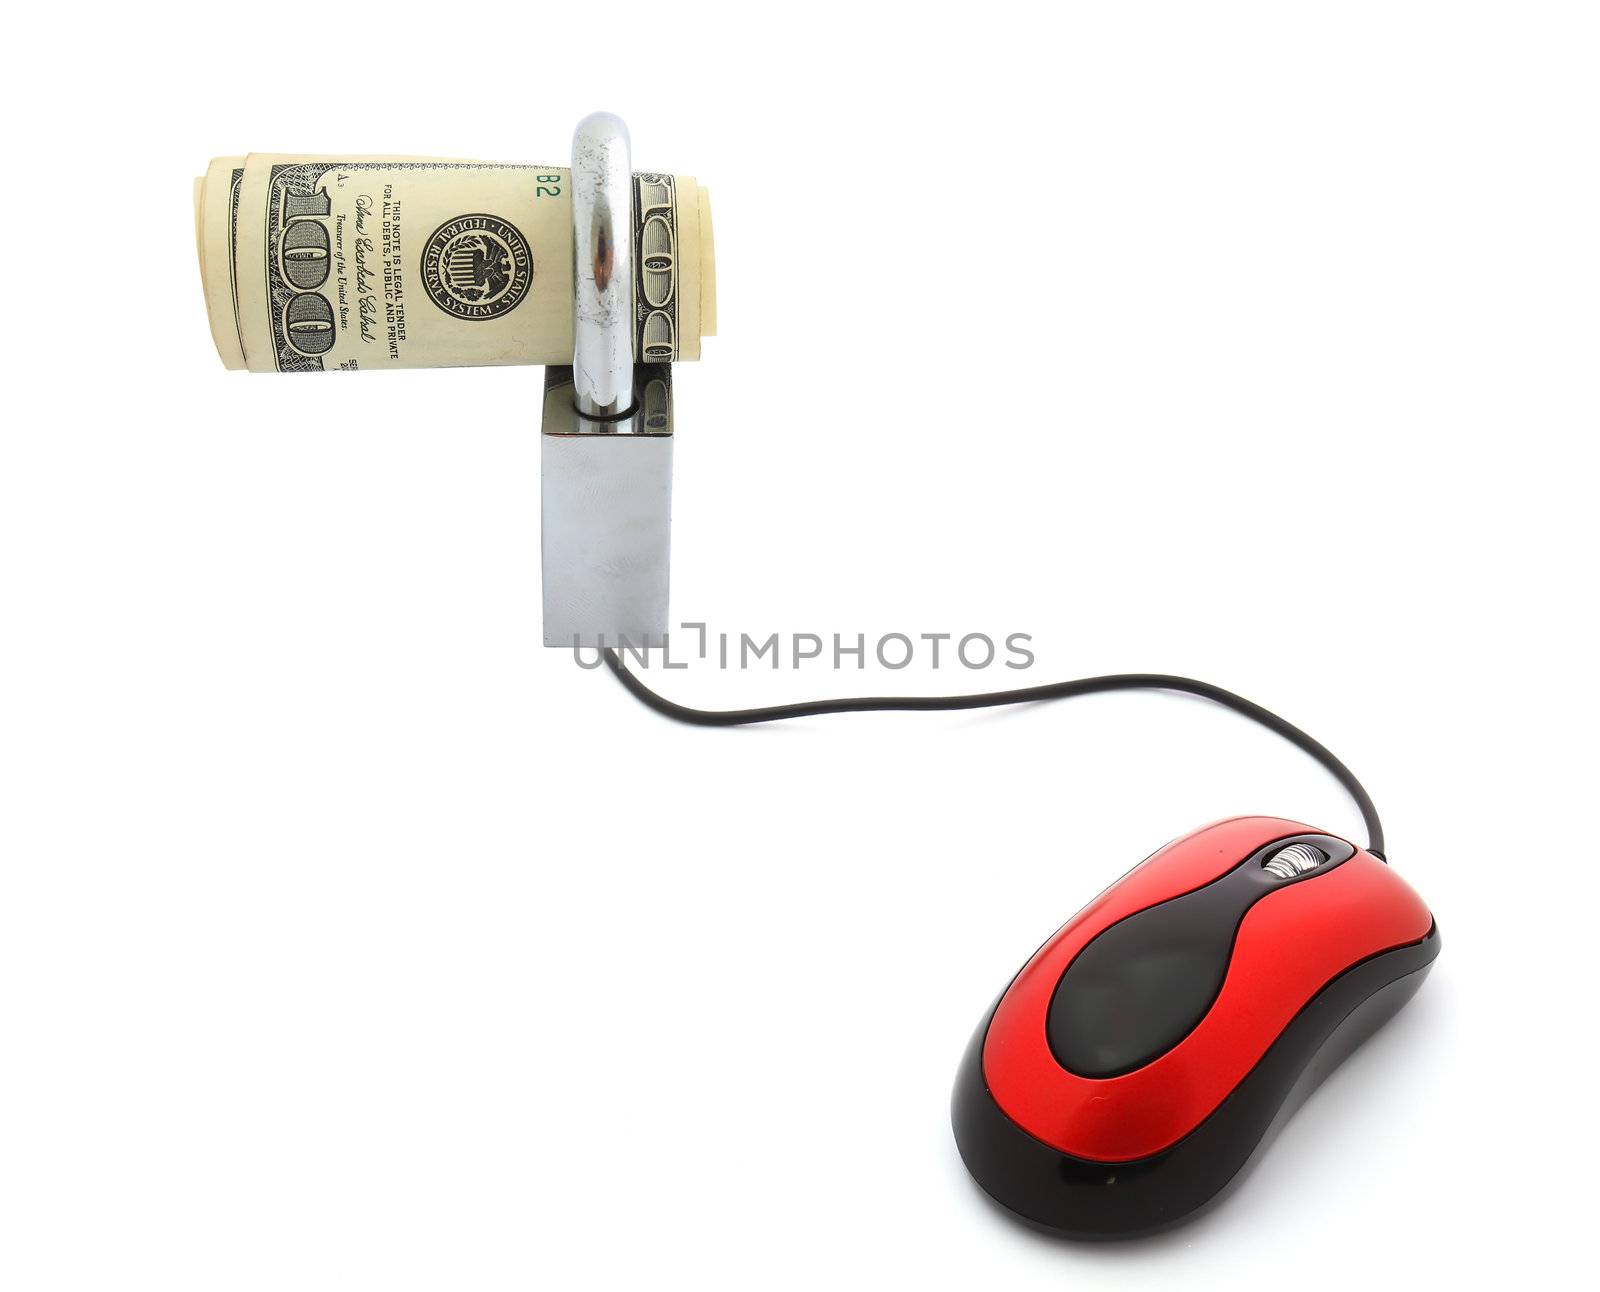 E-commerce - computer mouse and key money